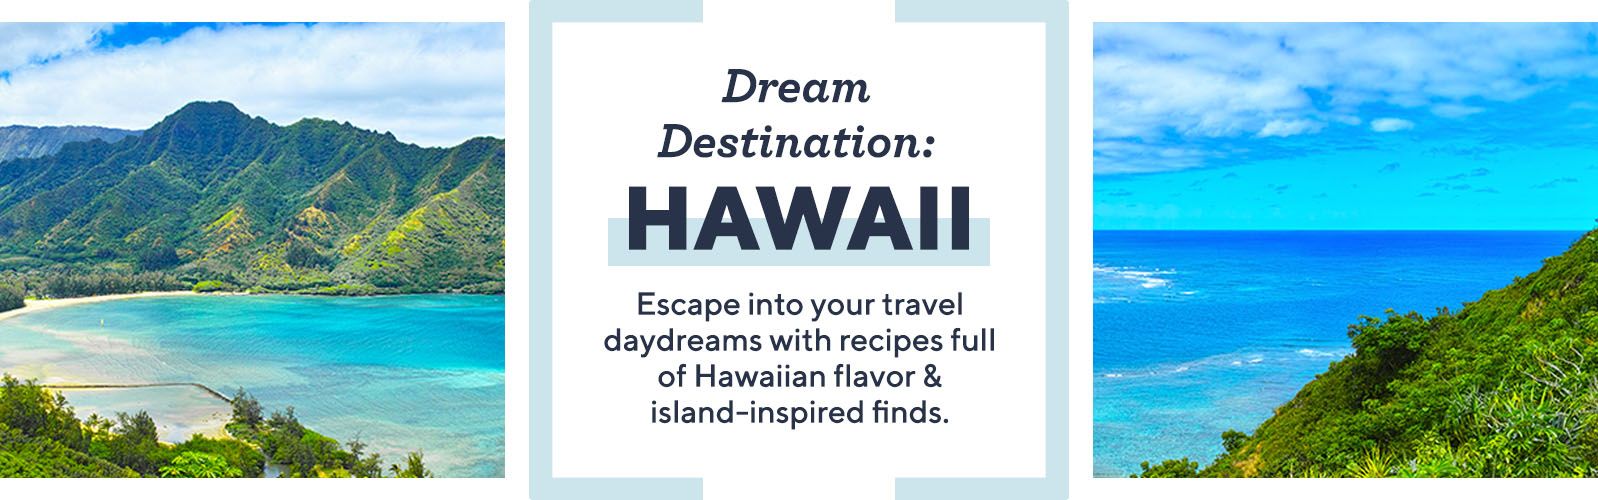 Dream Destination: Hawaii  Escape into your travel daydreams with recipes full of Hawaiian flavor & island-inspired finds.